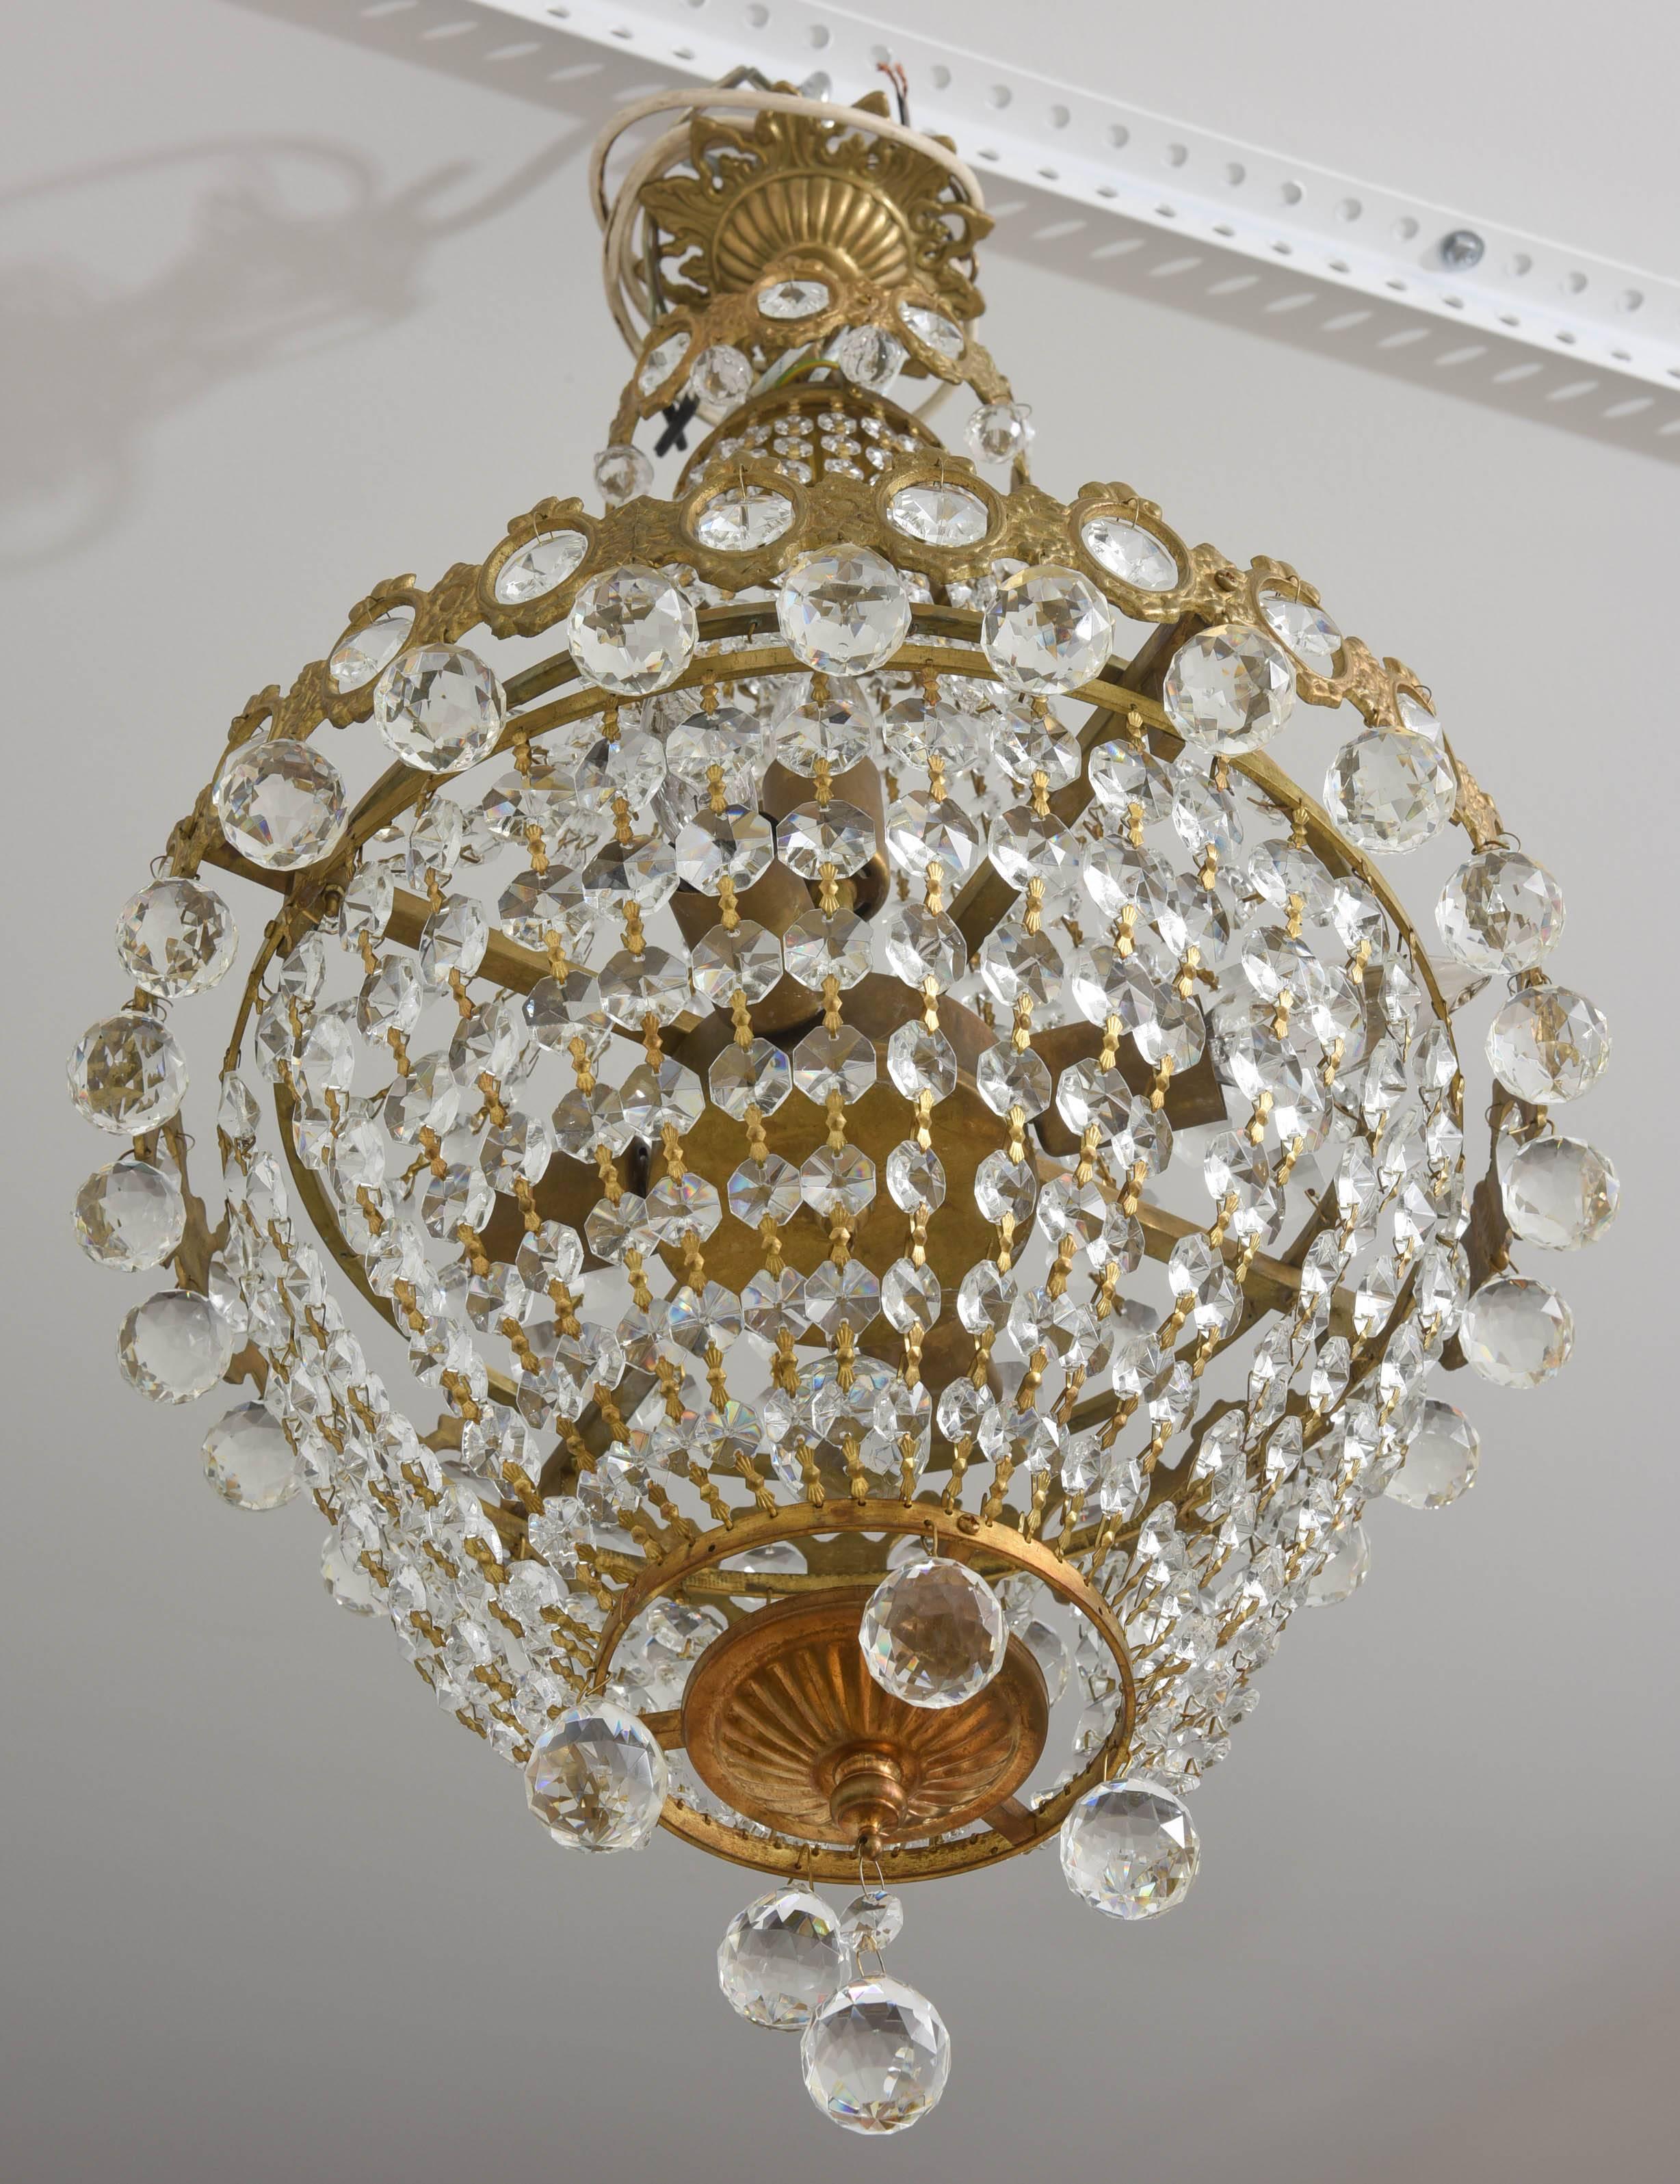 Hollywood Regency, Louis XVI Style Chandelier in Antique Brass and Crystals 3